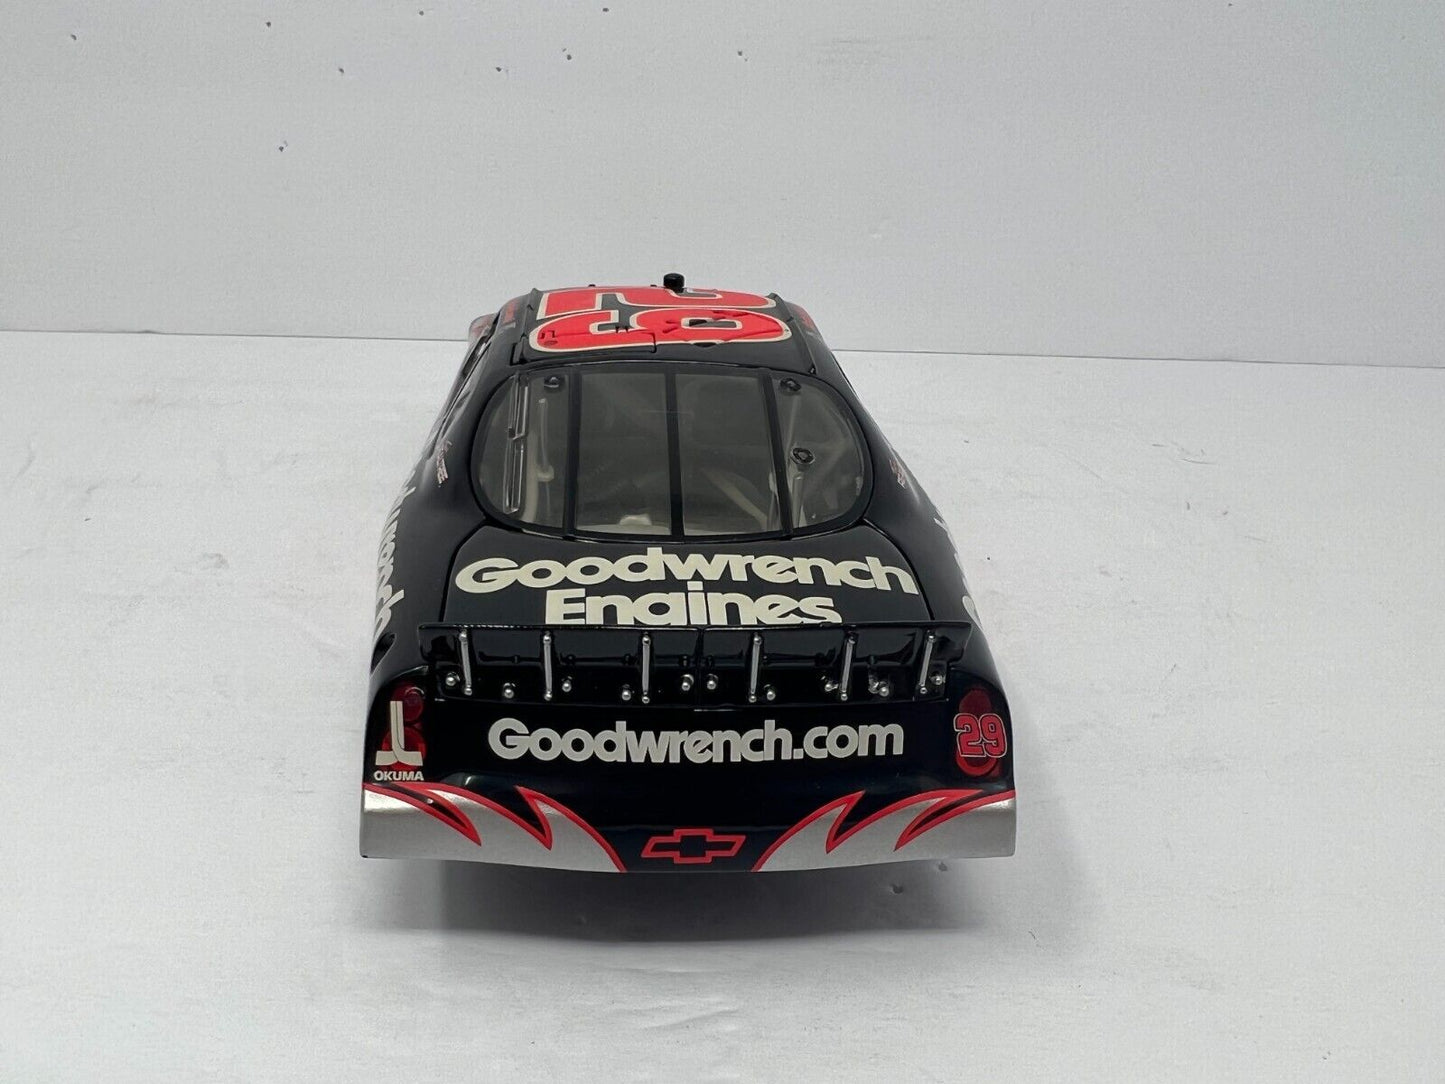 Action Nascar #29 Kevin Harvick Goodwrench GM Dealers (1 of 2,700#) 1:24 Diecast